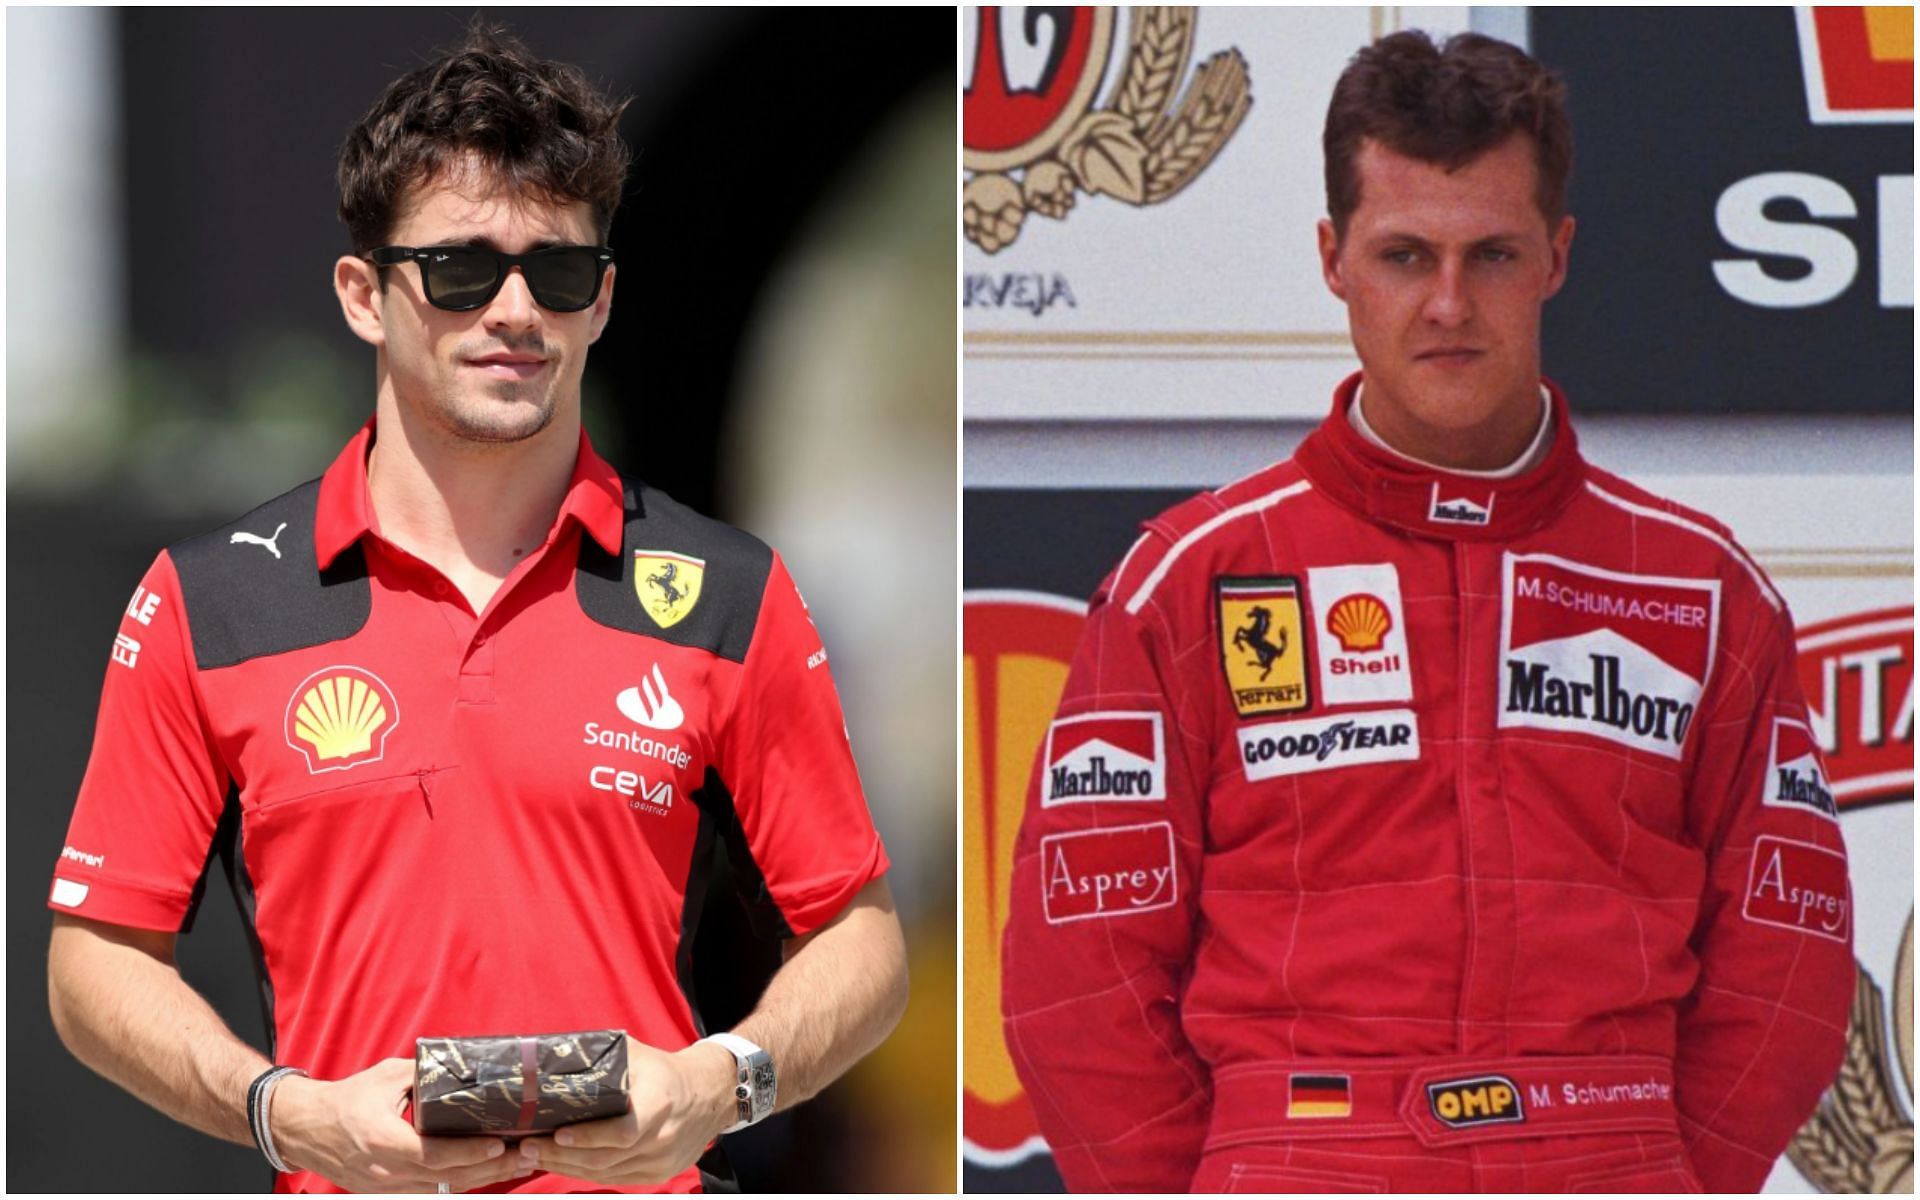 Charles Leclerc (Left) and Michael Schumacher (Right) (Collage via Sportskeeda)